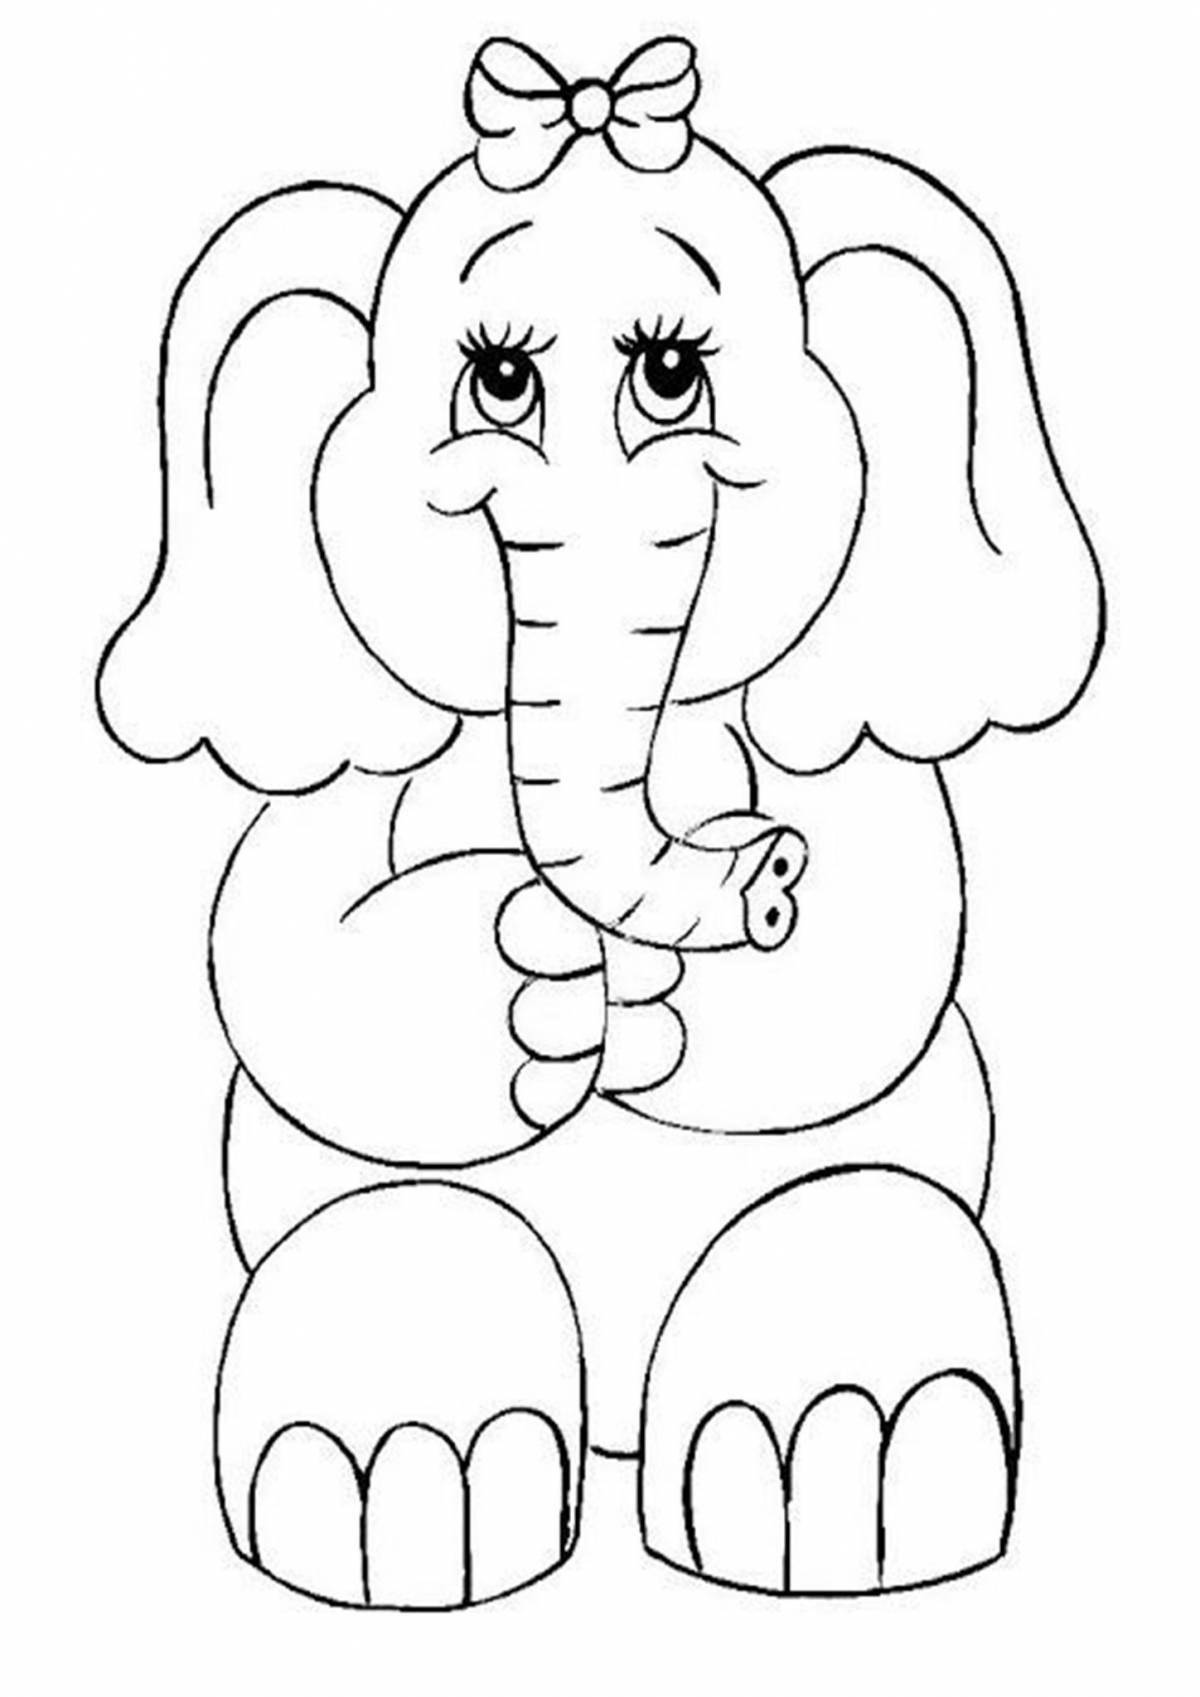 Fancy elephant coloring book for 3-4 year olds